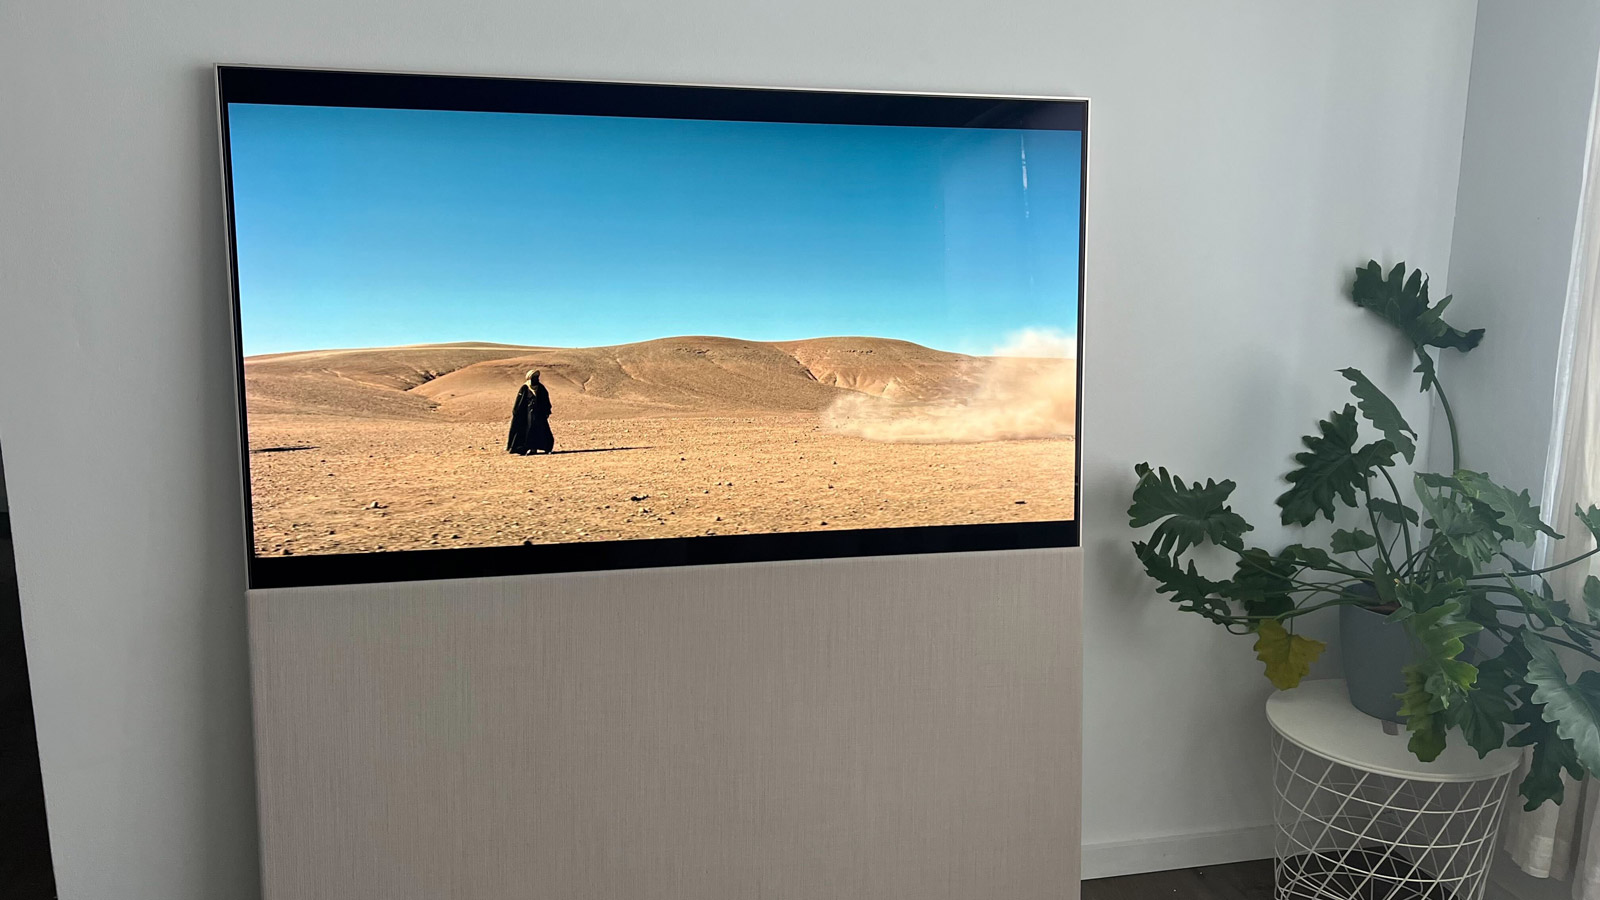 LG Easel OLED TV with a movie scene on screen